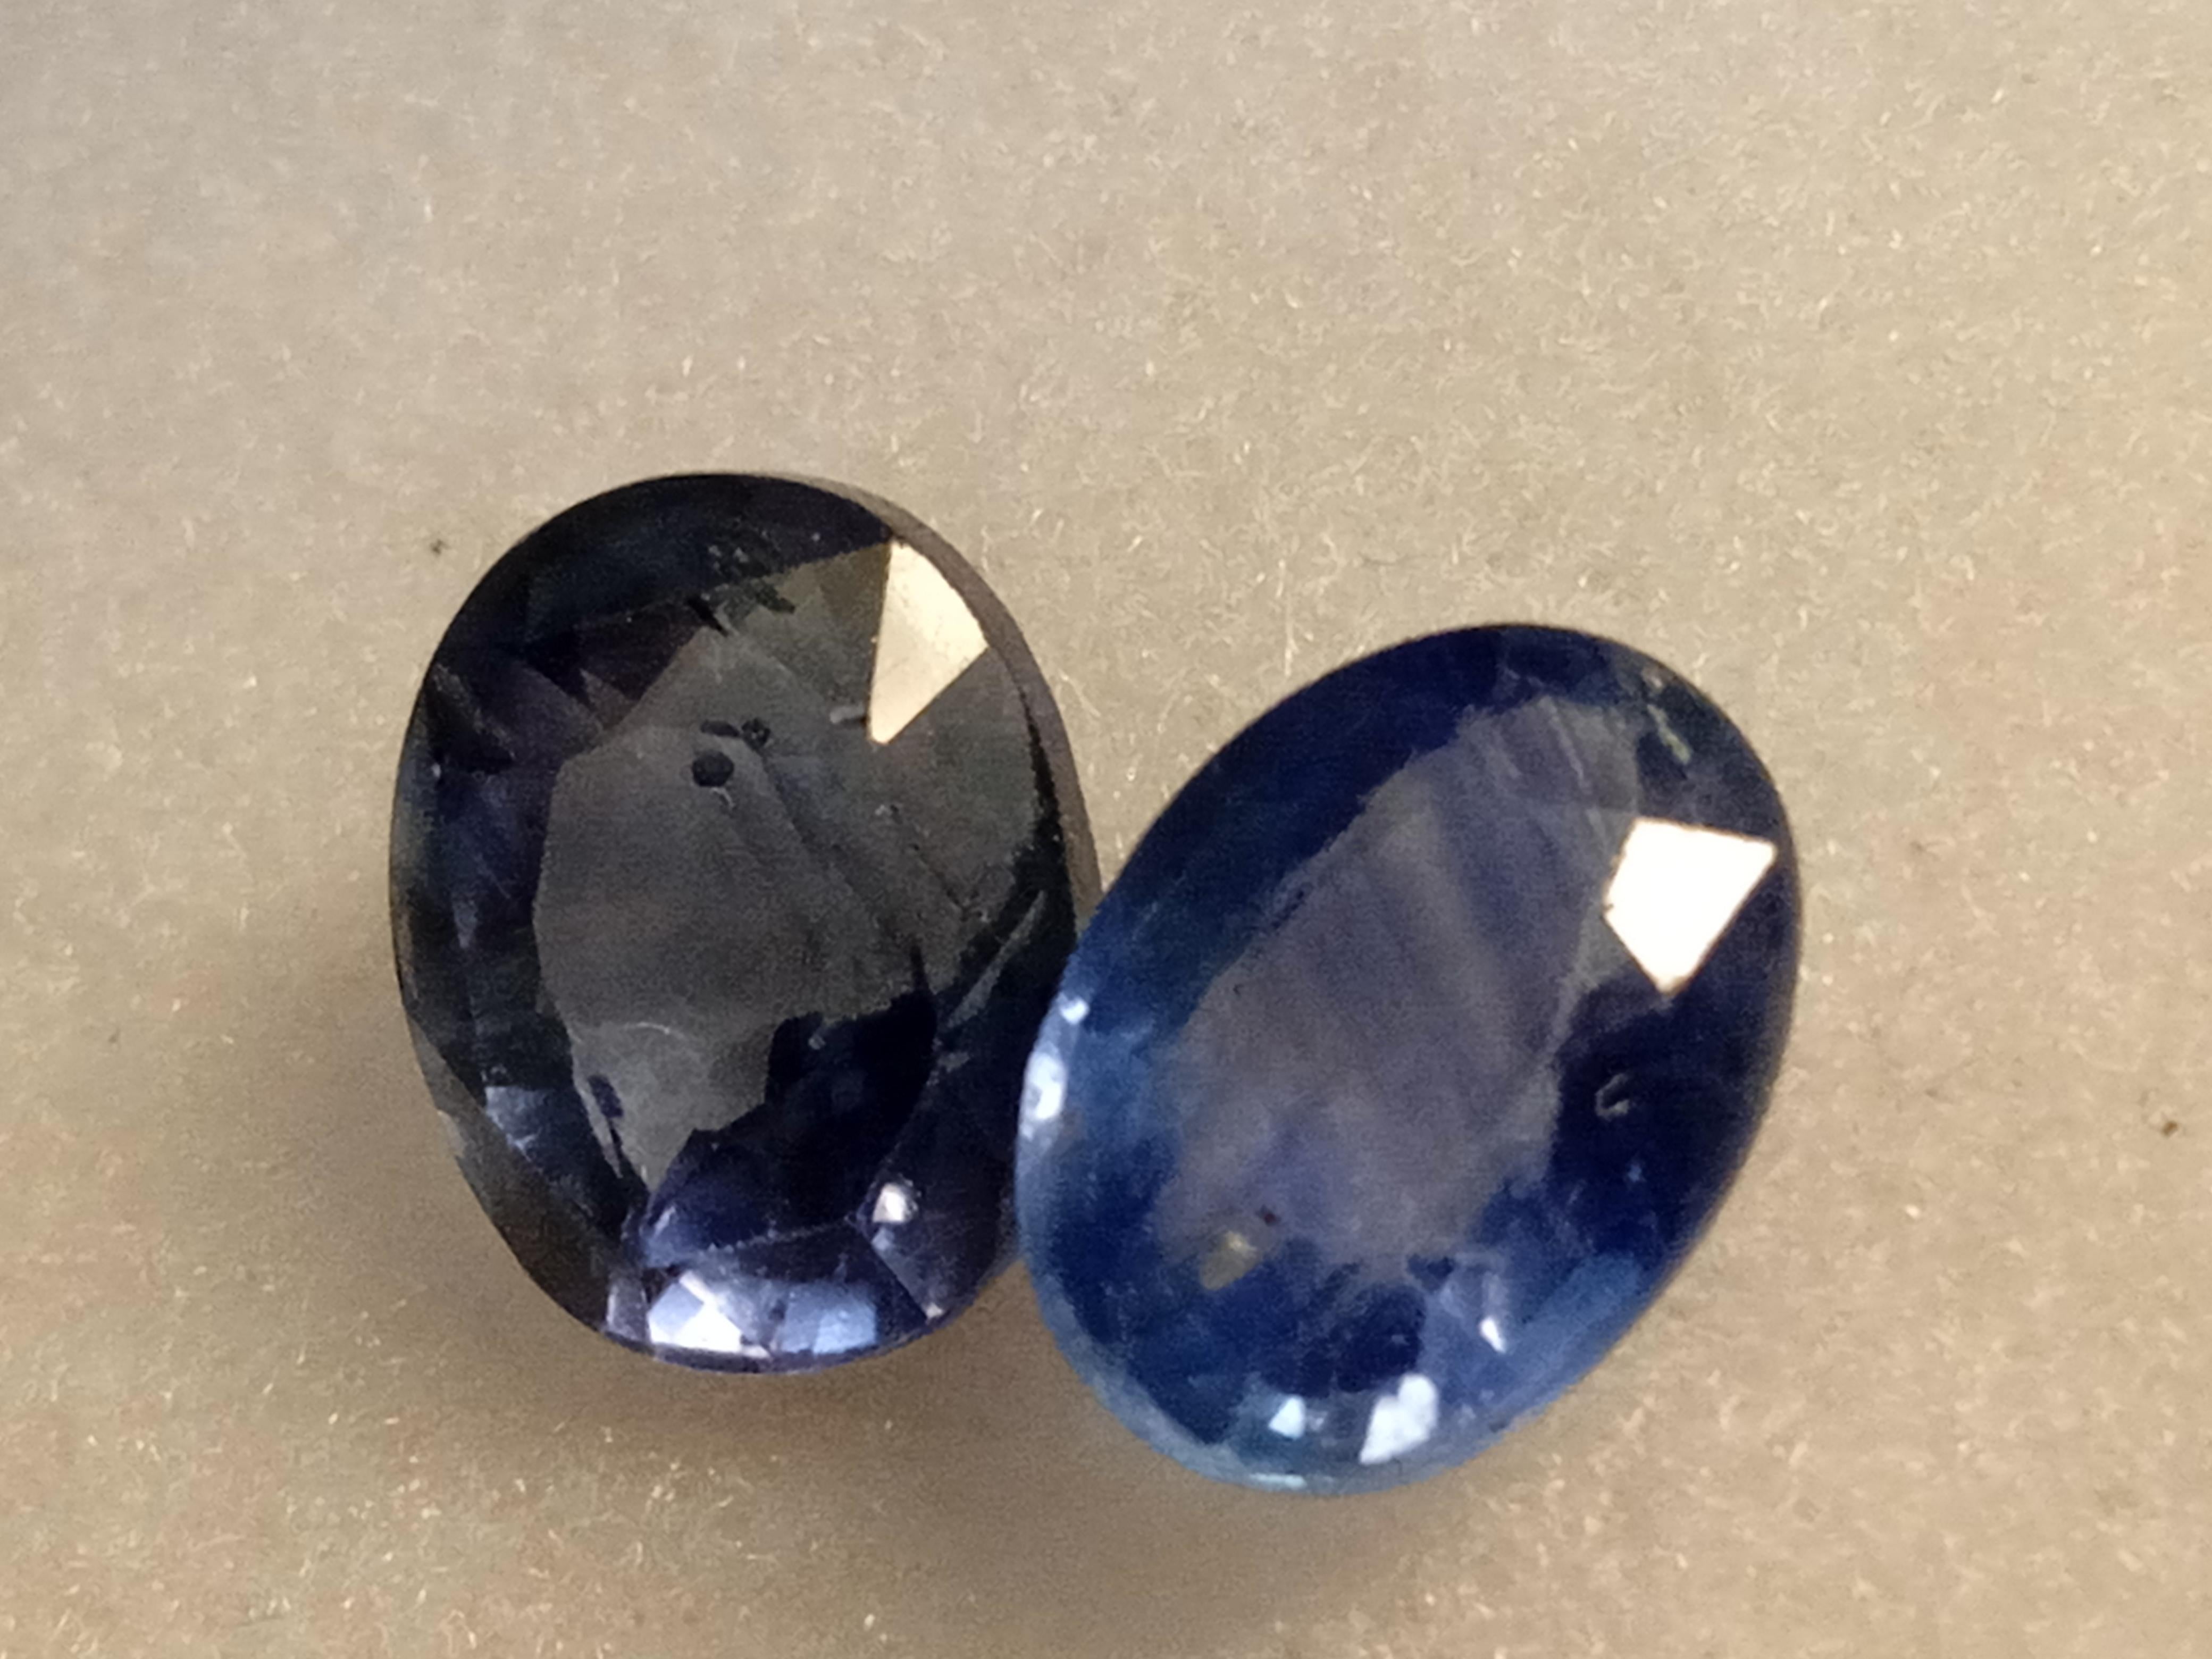 Enhance your jewellery collection with this exquisite piece of natural blue sapphire. The gemstone has been cut to perfection in an oval shape and boasts of excellent cut grade and eye-clean clarity. It comes from Sri Lanka, a region known for